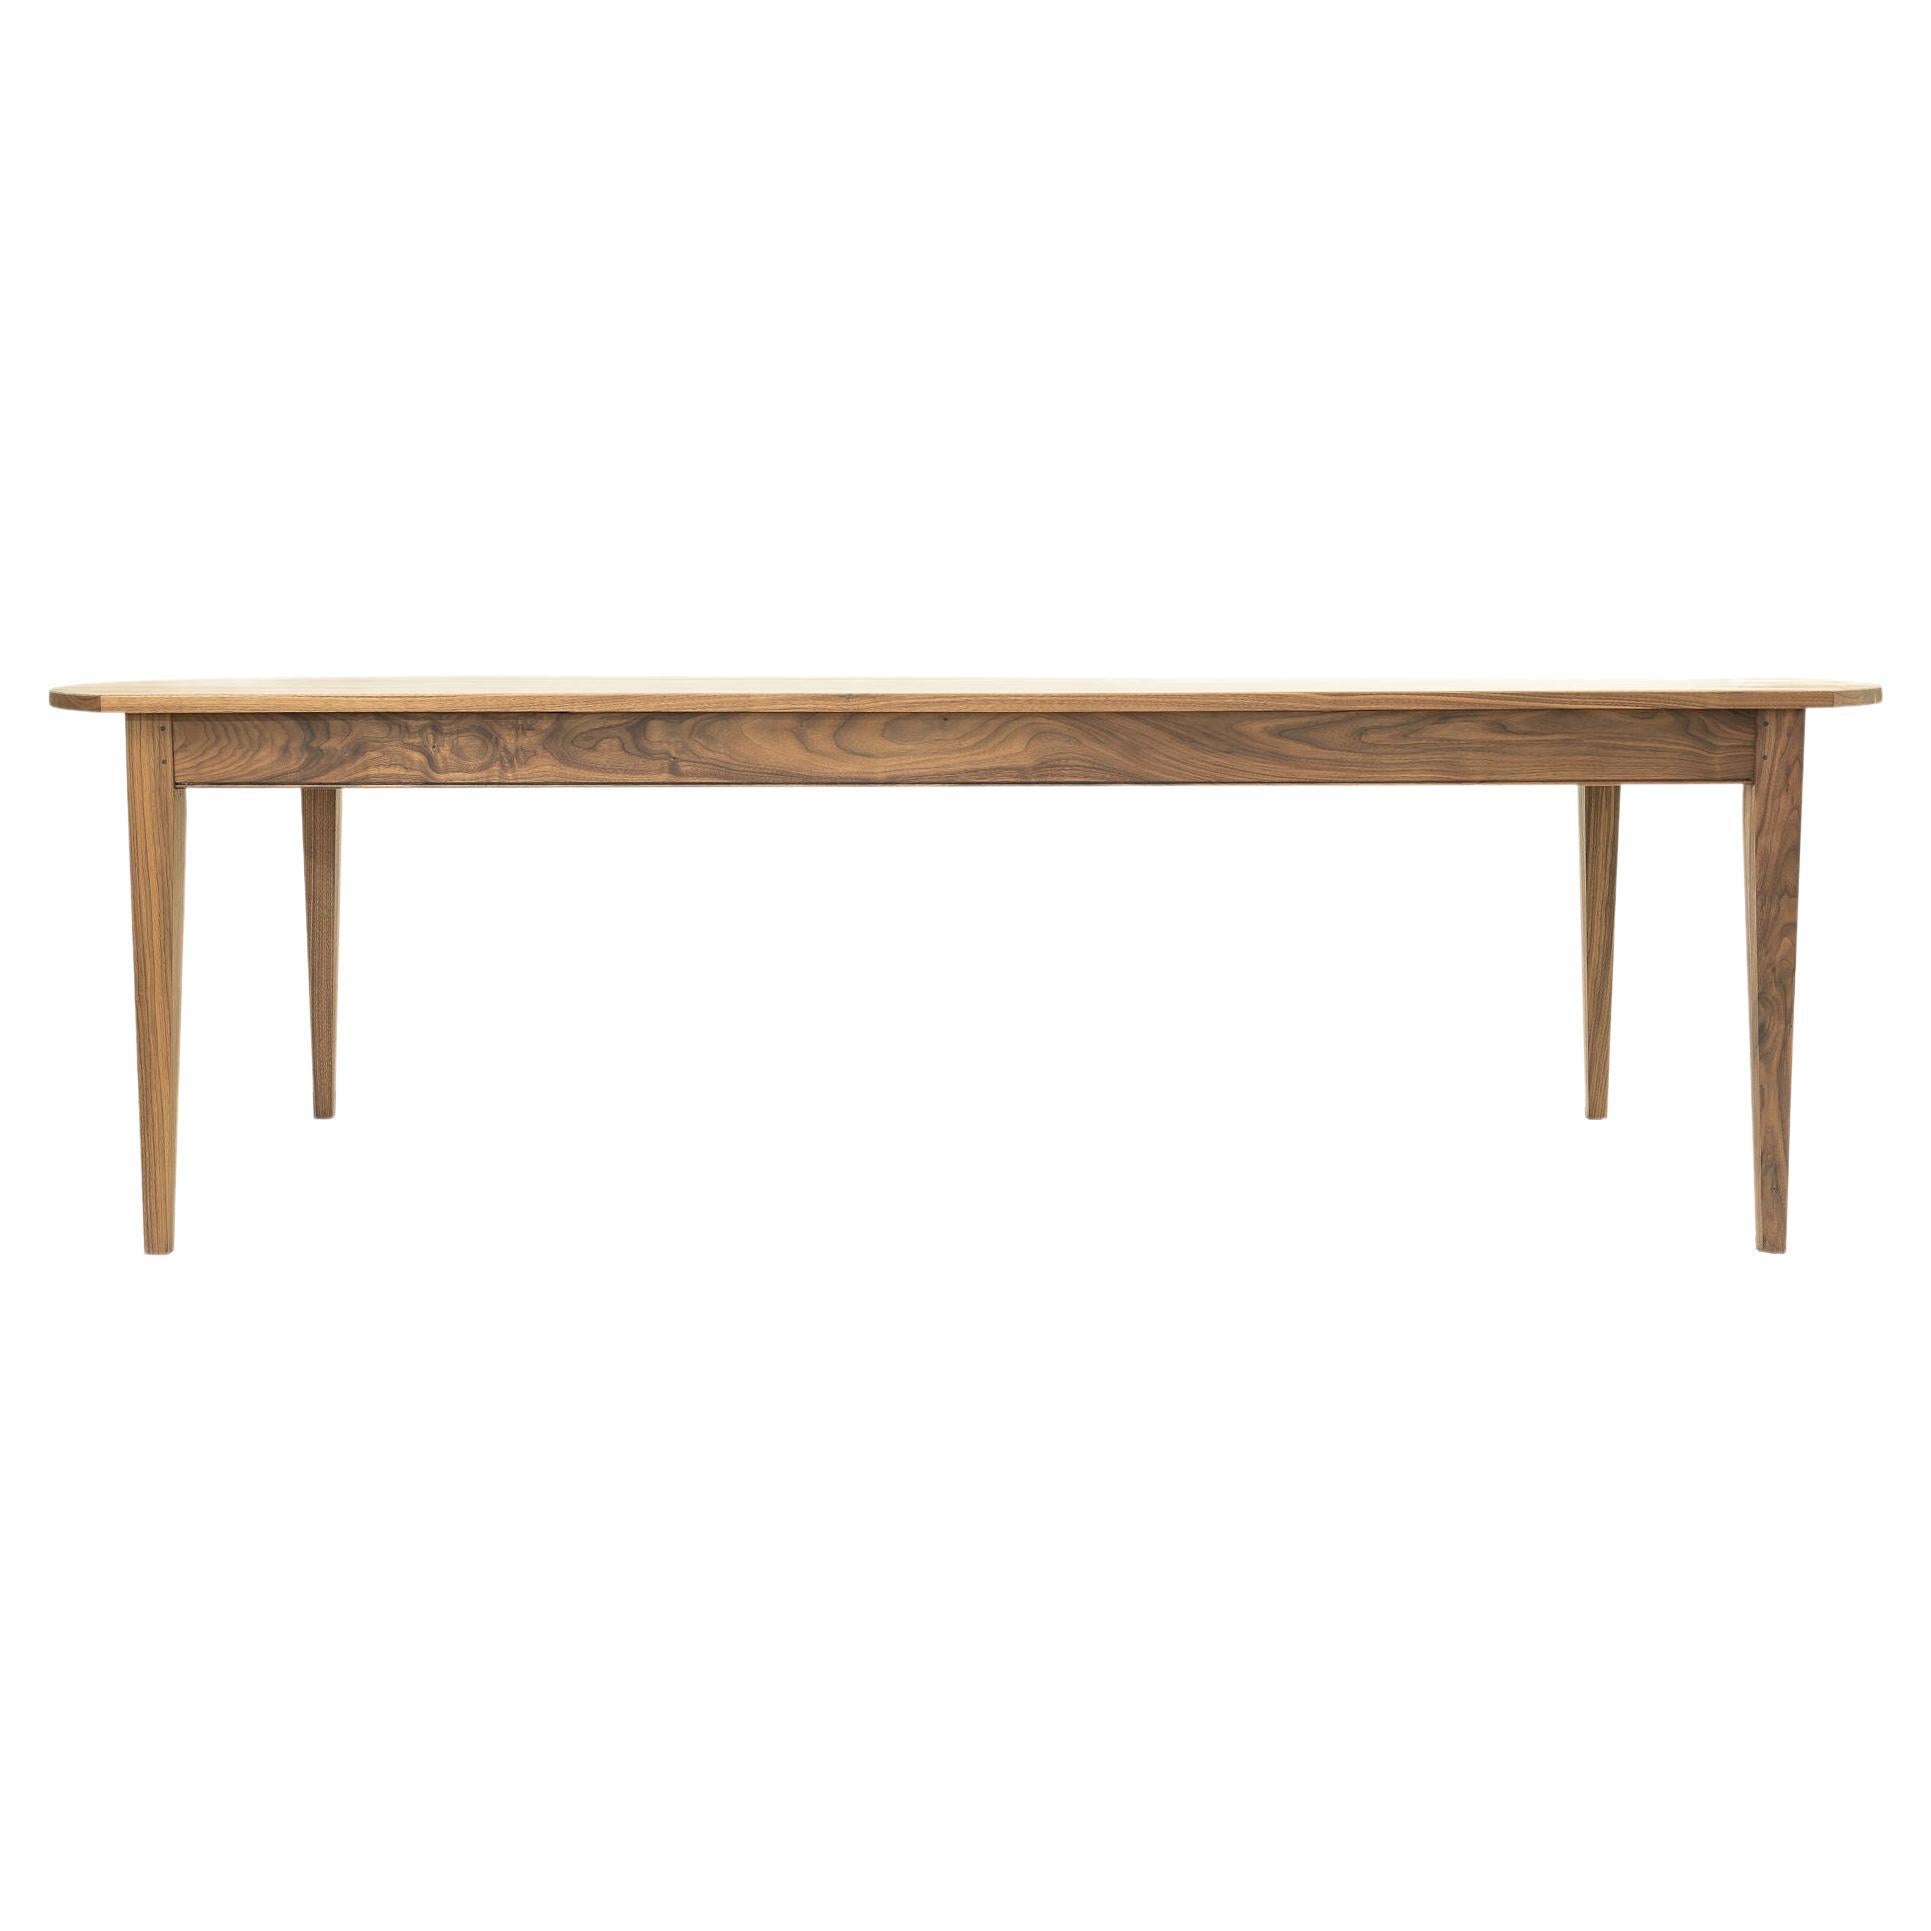 Adair Table, Refined English Rustic Dining Table in Walnut